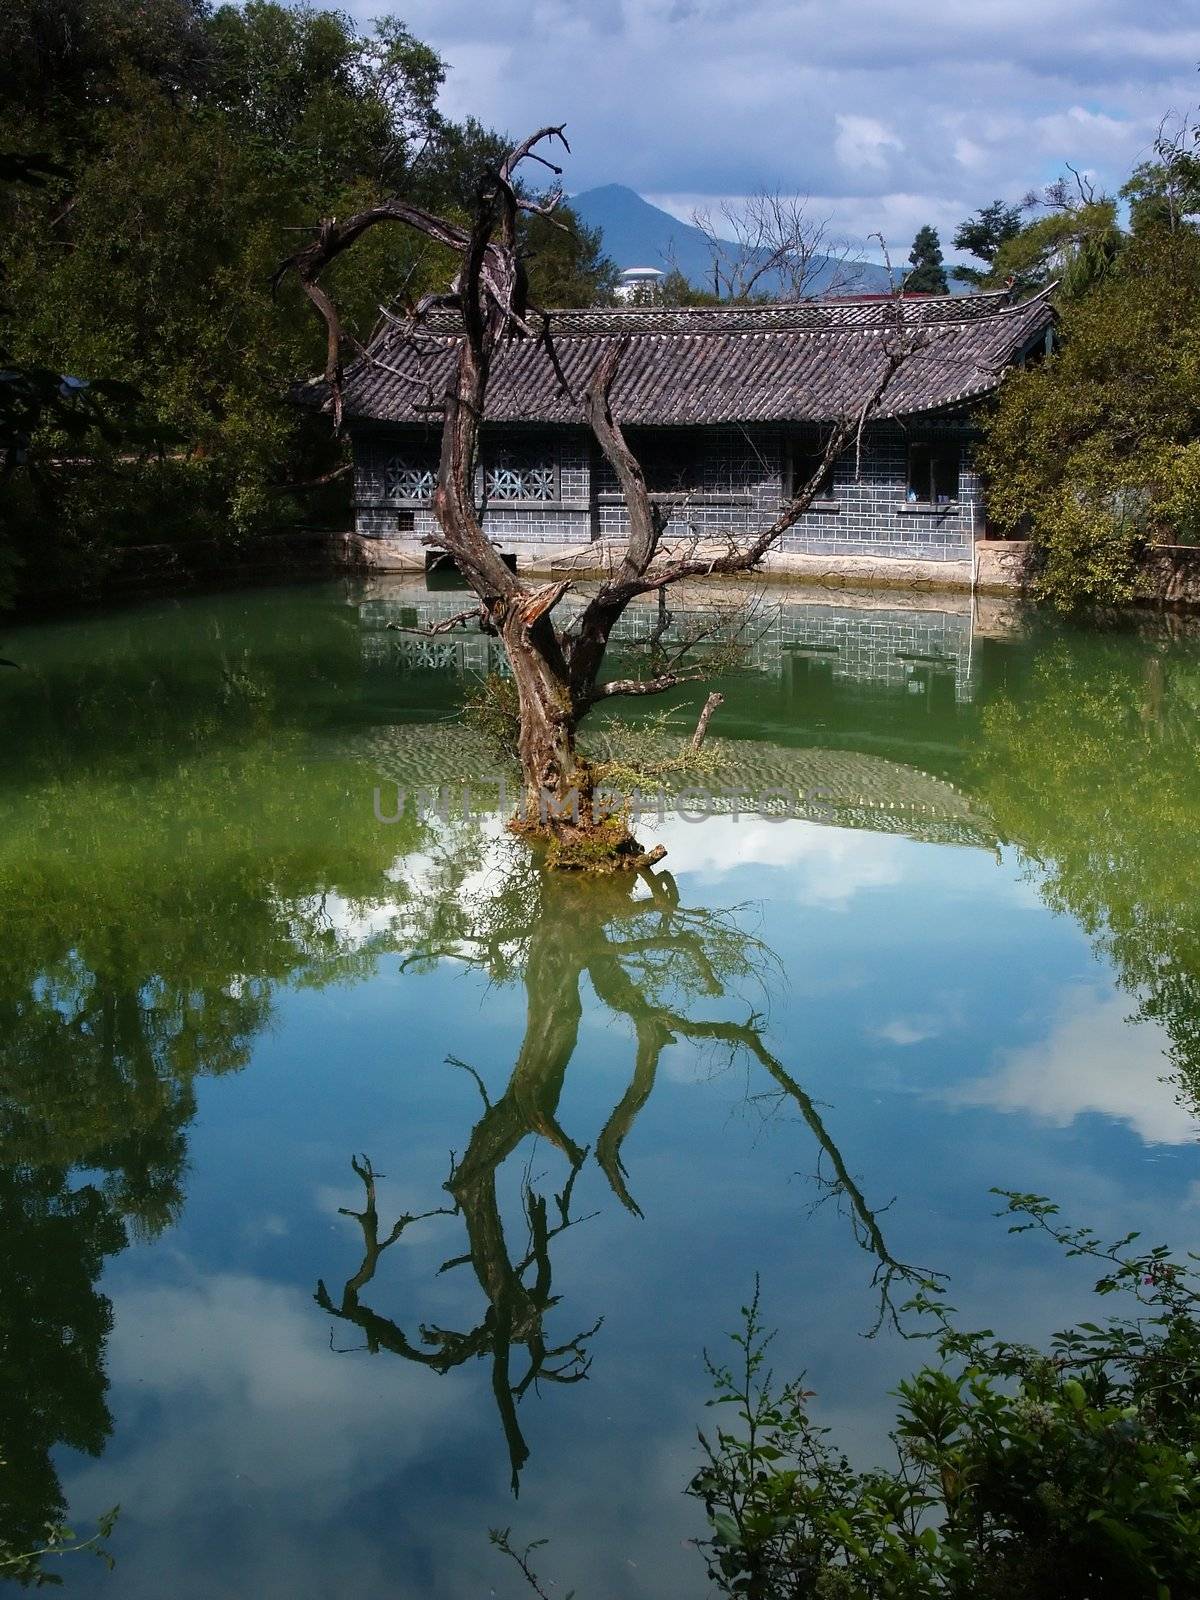 A scenery park in Lijiang China - a top tourist town